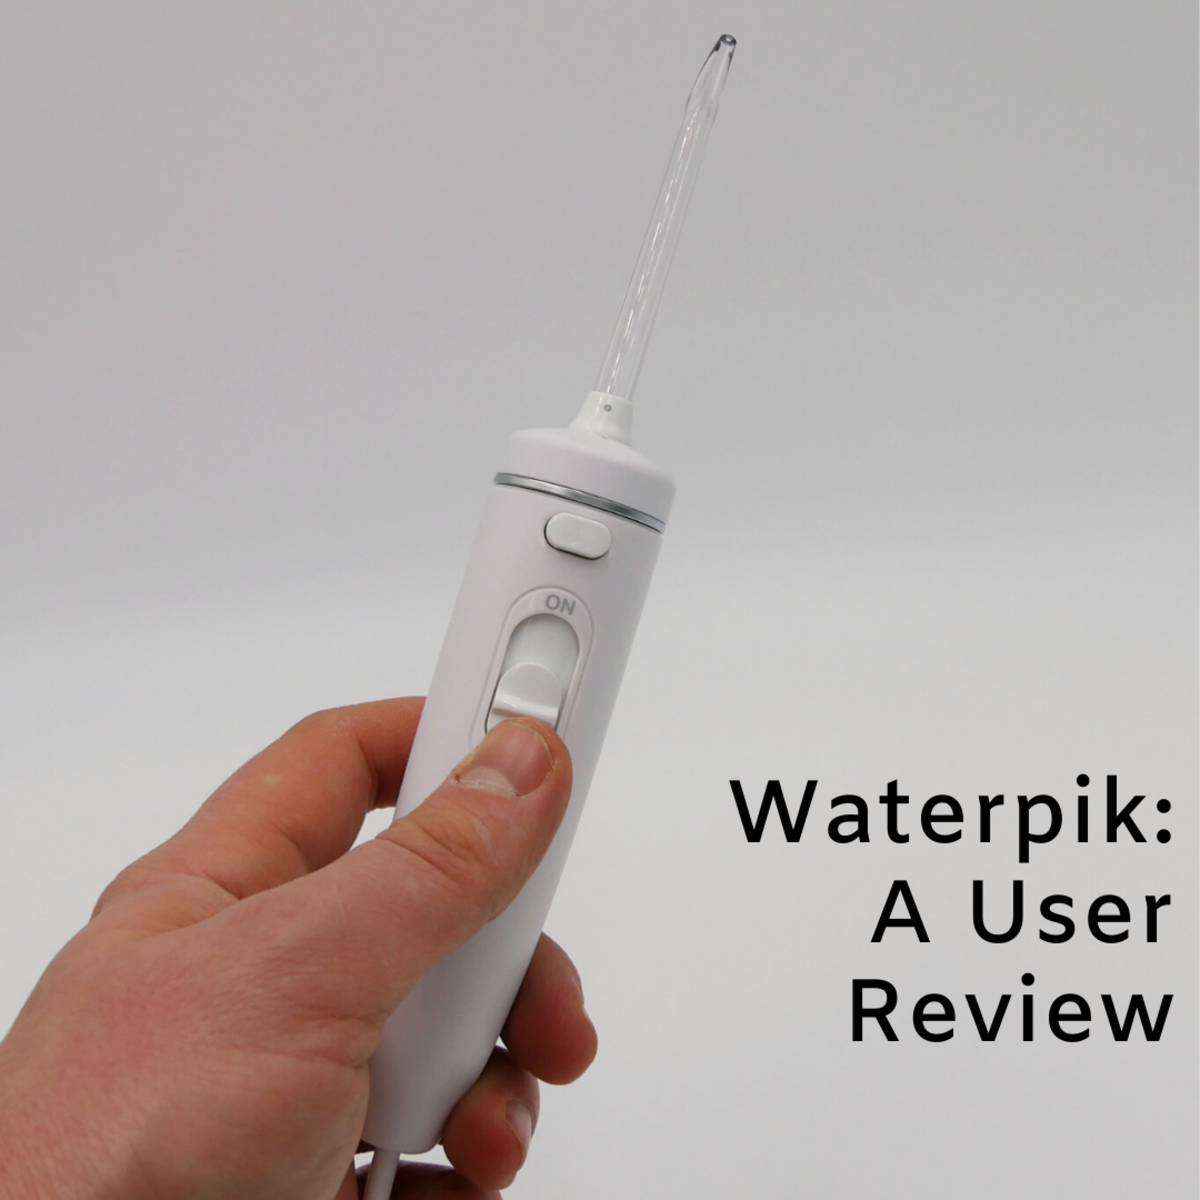 This review will detail my experience using the Waterpik Water Flosser Ultra.